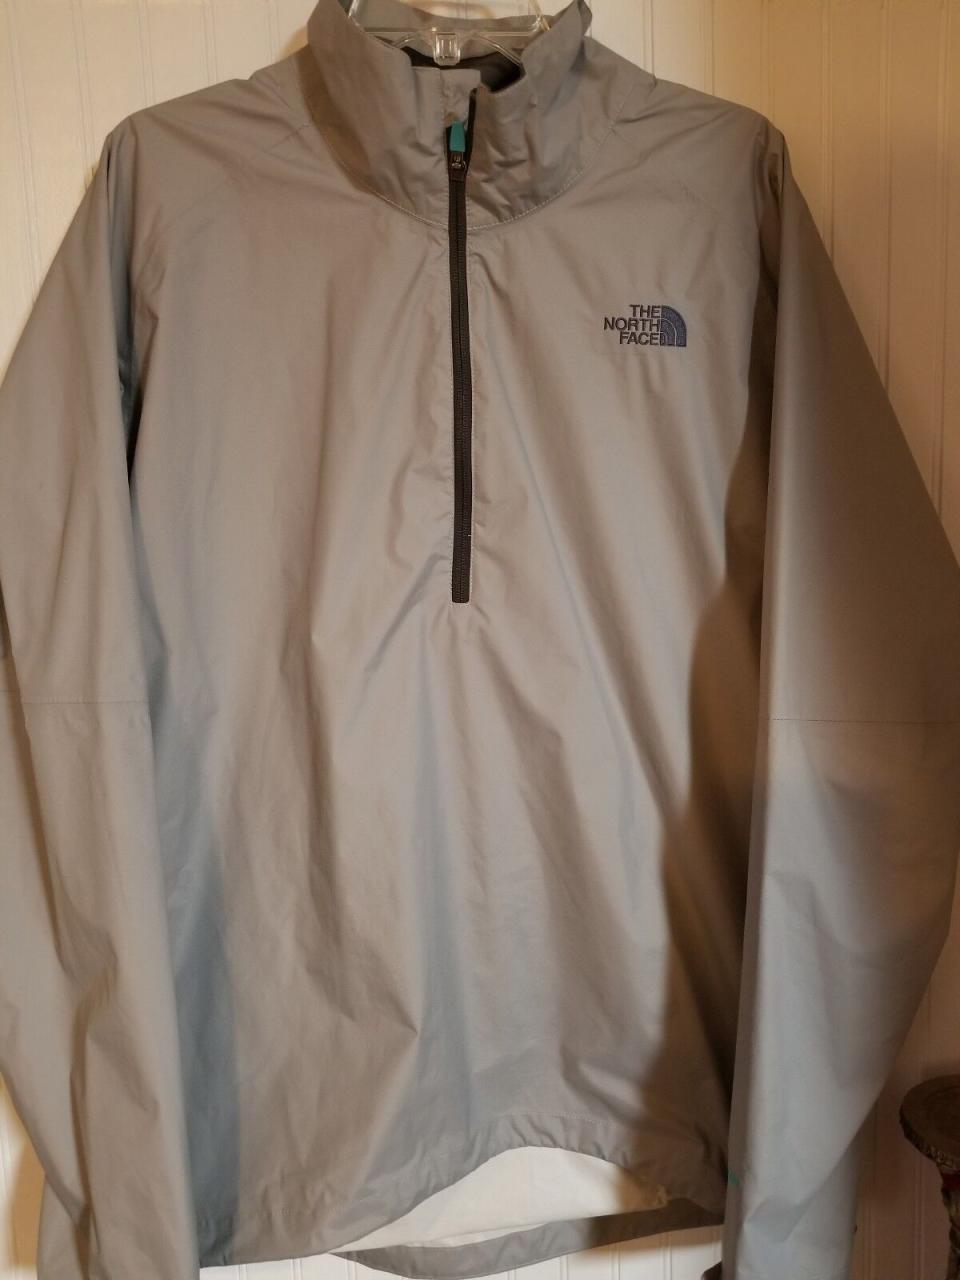 The North Face Men'S Large Hyvent Jacket Rn#61661 Ca#30516 Free Shipping |  Ebay